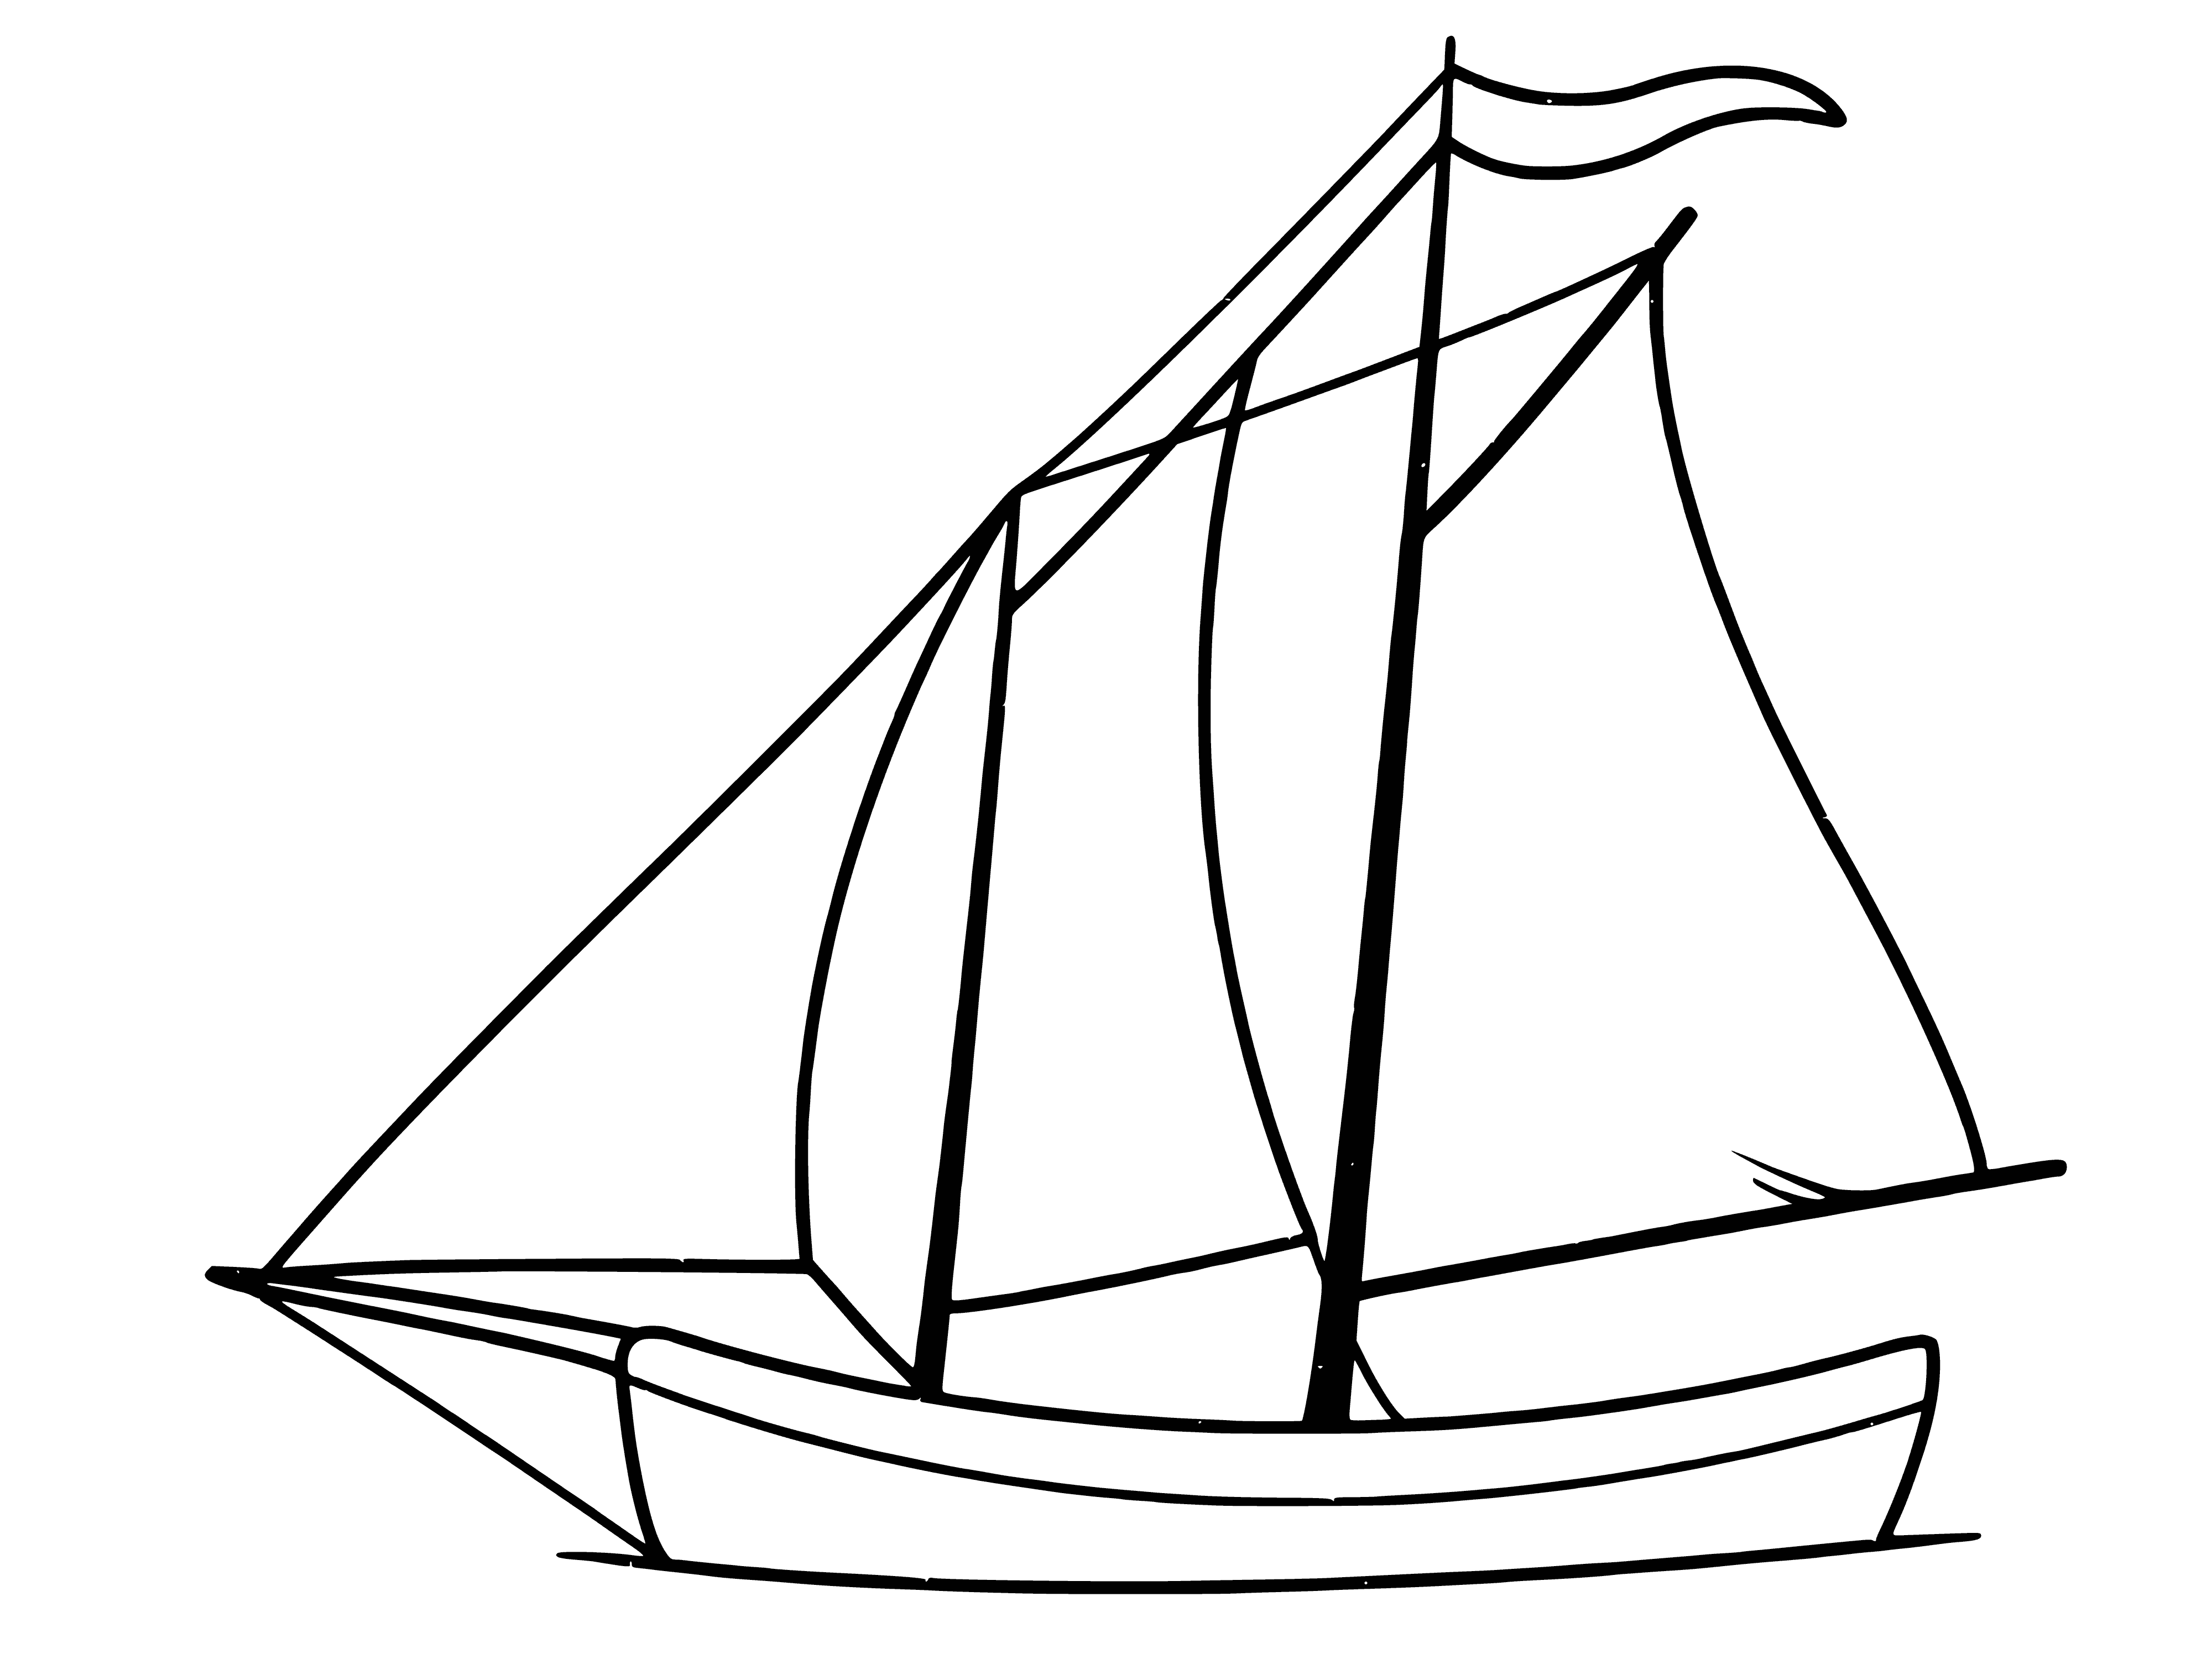 coloring page: A white-hulled sailboat behind a buoy with a brown mast on the water in a coloring page.